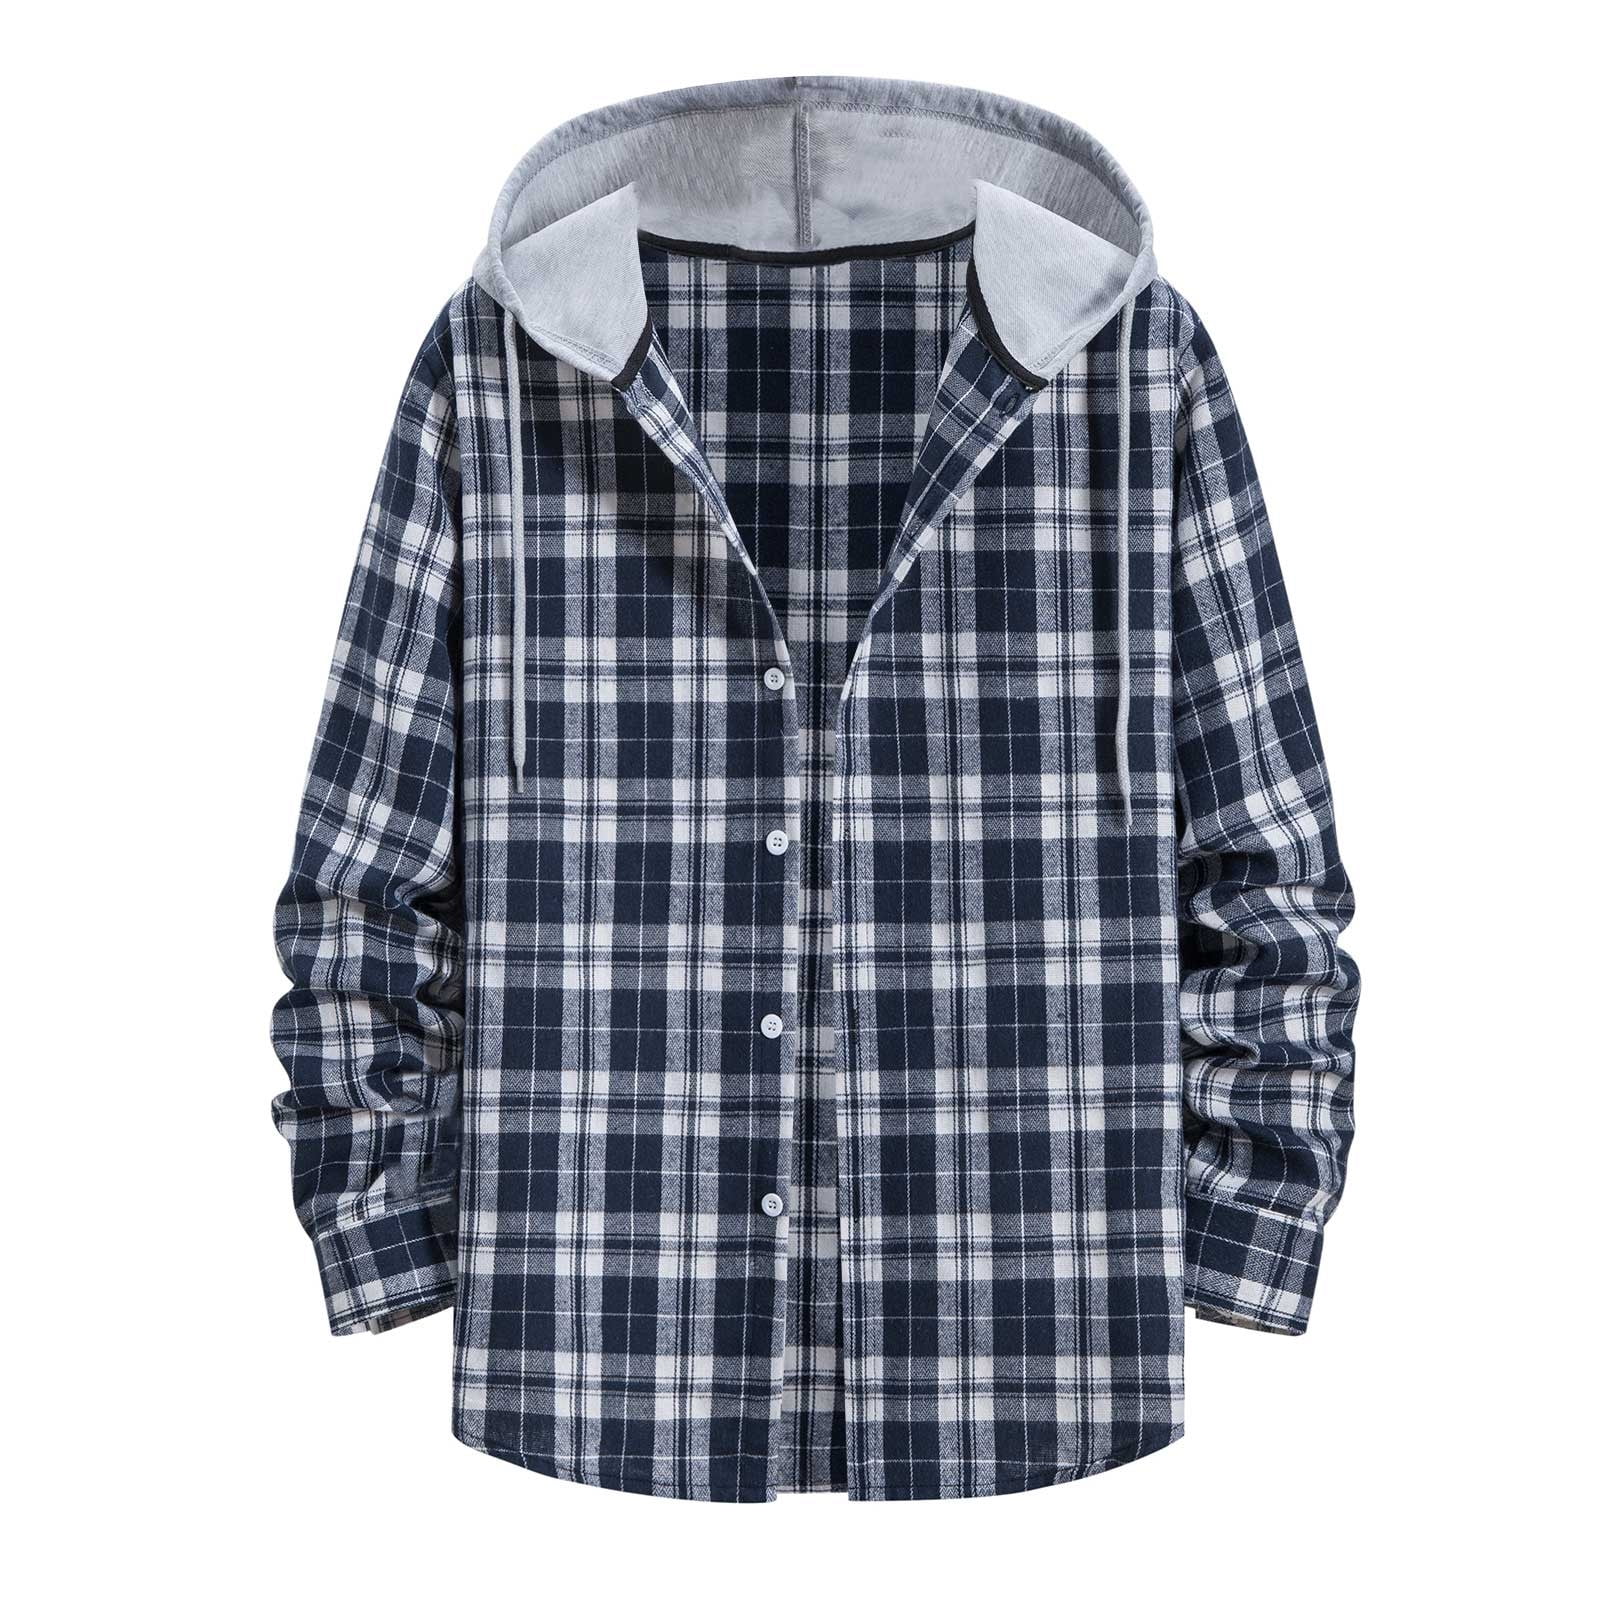 YYDGH Men's Flannel Plaid Shirt Jacket Winter Warm Long Sleeve Quilted  Lined Plaid Drawstring Coats Soft Button Down Thick Shirts with Hood Orange  XXL 